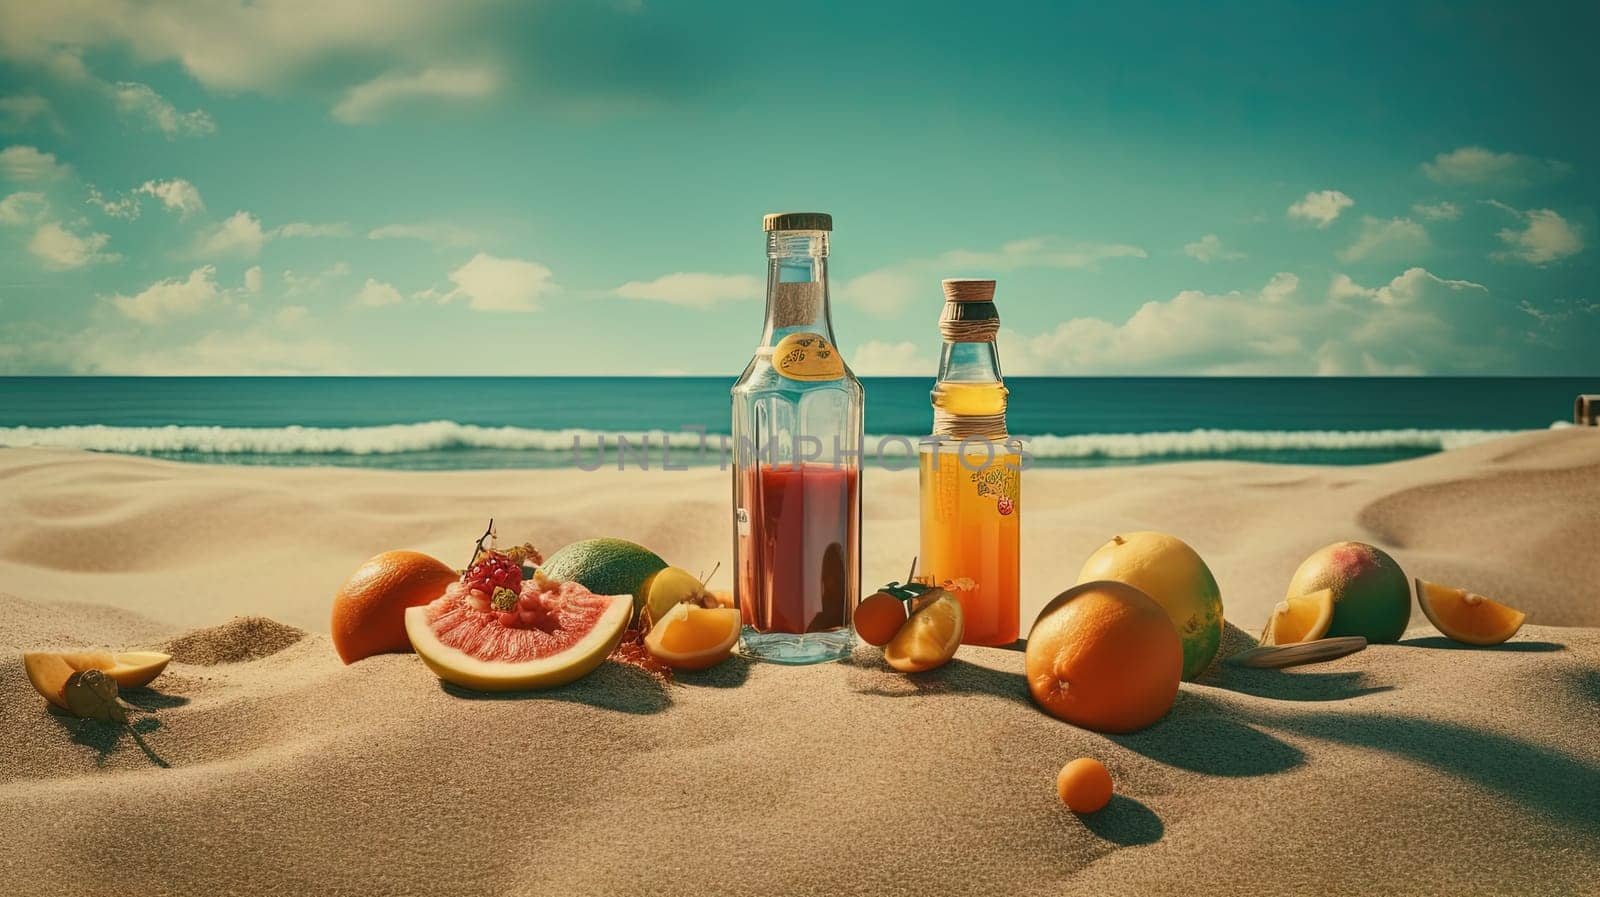 Bottle with fruit water or alcohol in the sand of the beach. Vacation scene with lemonade bottle on the shore line. Generative AI. by SwillKch